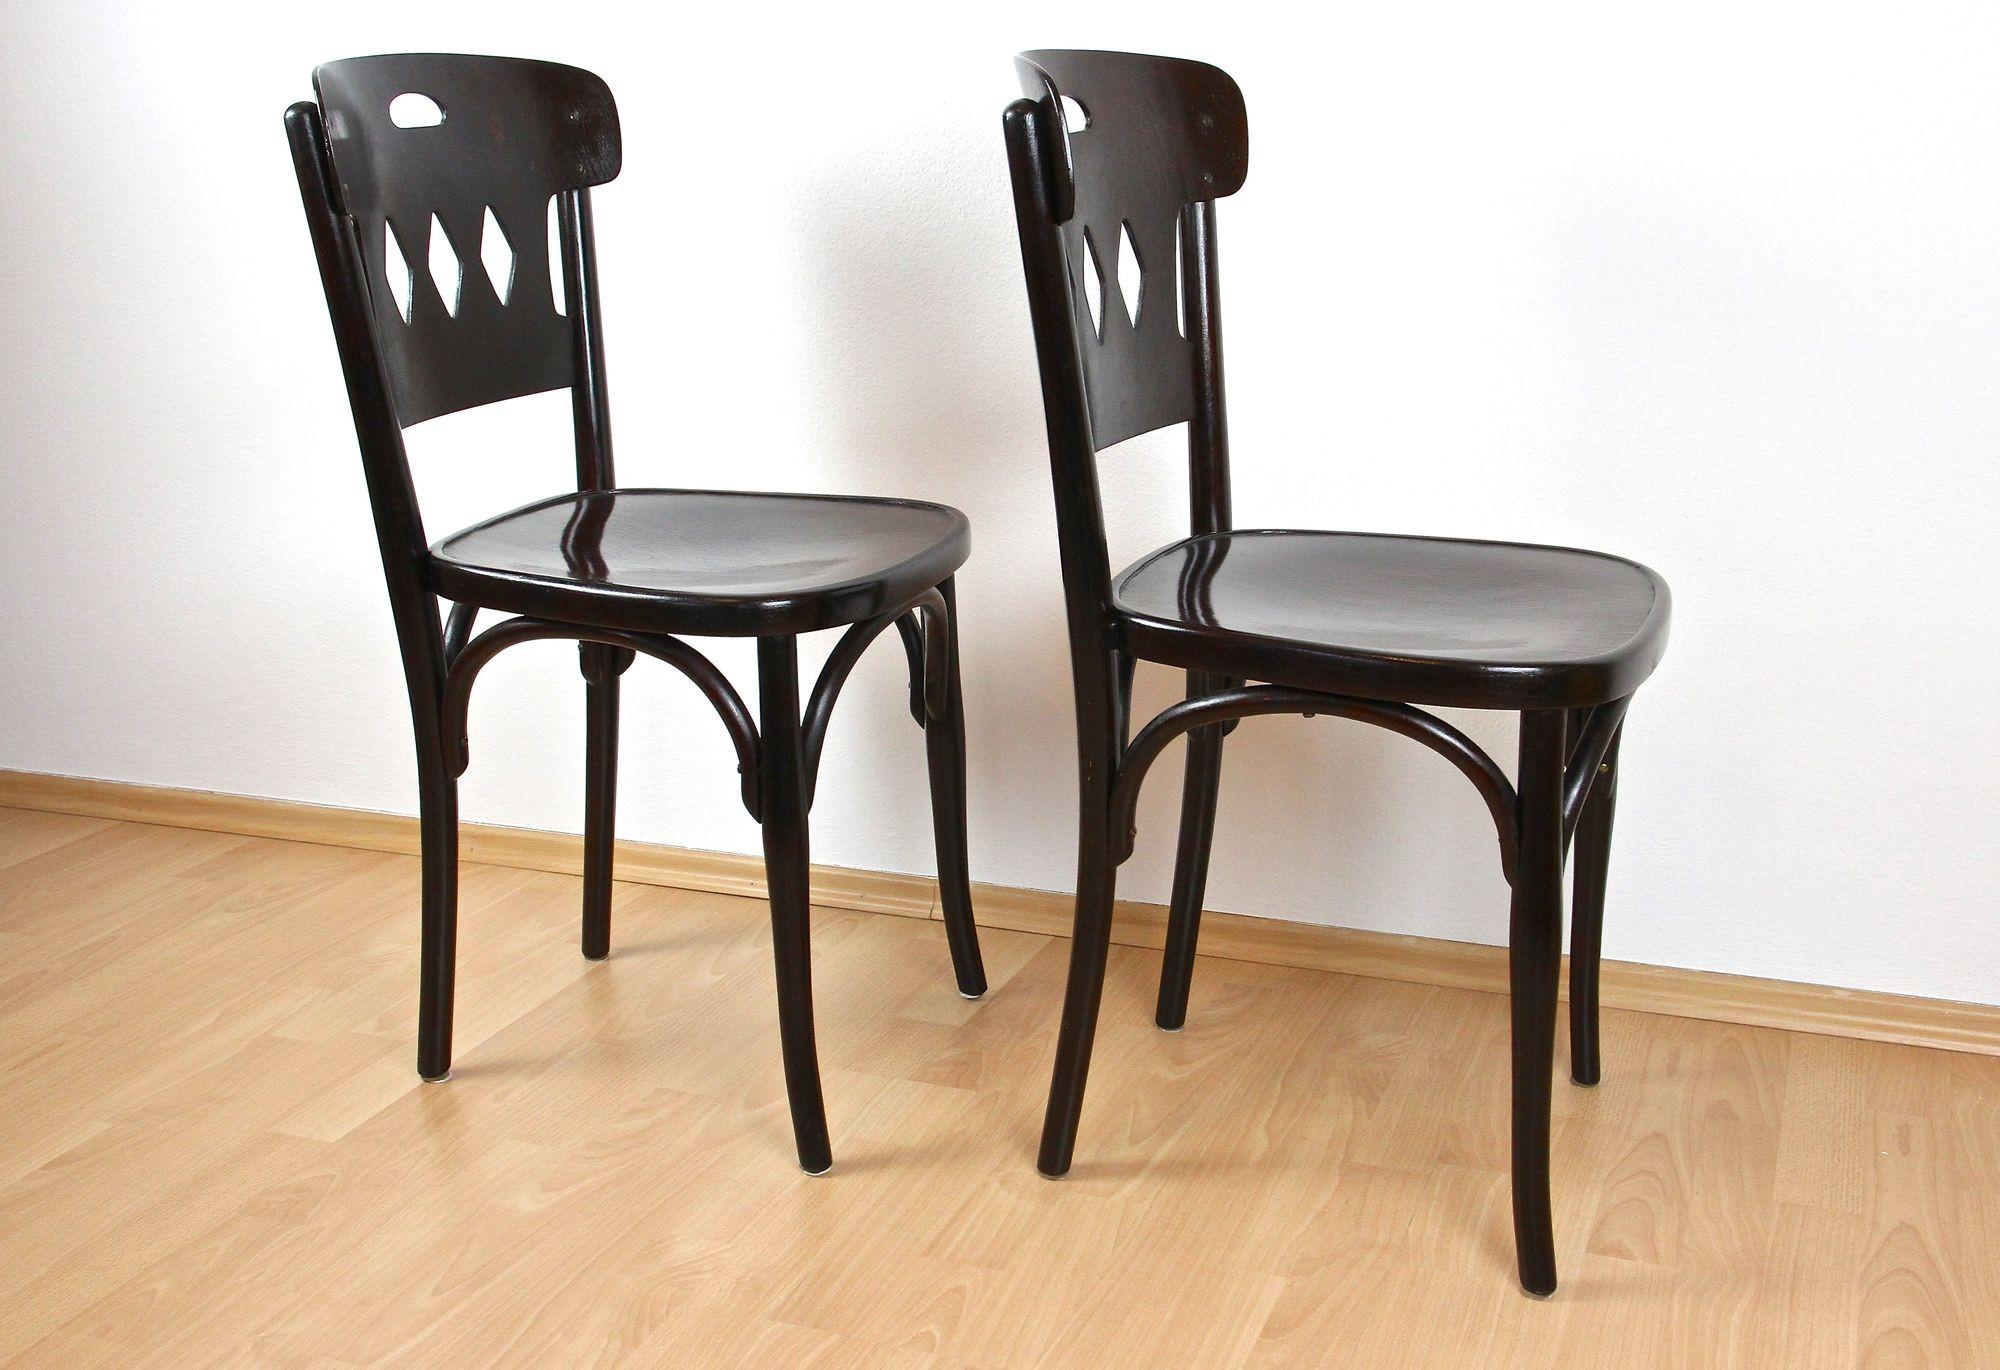 Pair Of Art Nouveau Bentwood Chairs by J&J Kohn, Vienna ca. 1910 For Sale 4